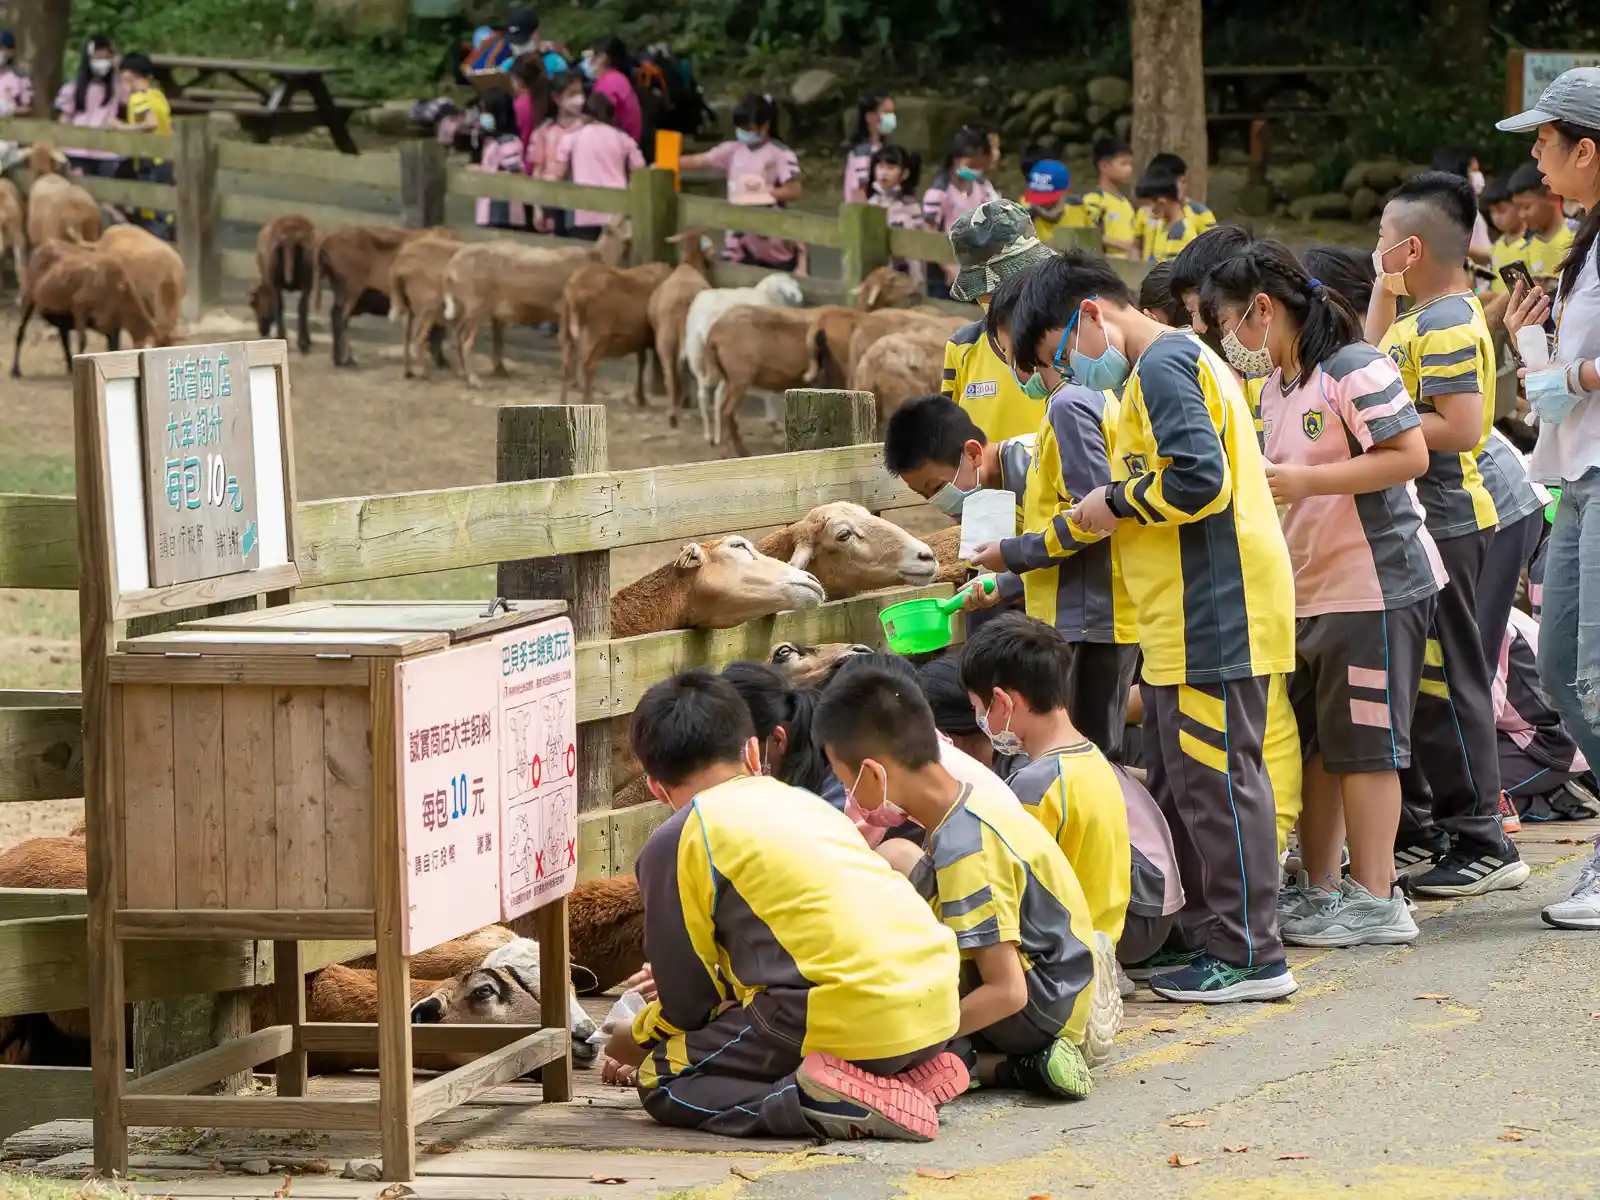 A group of children feed sheep through a fence.